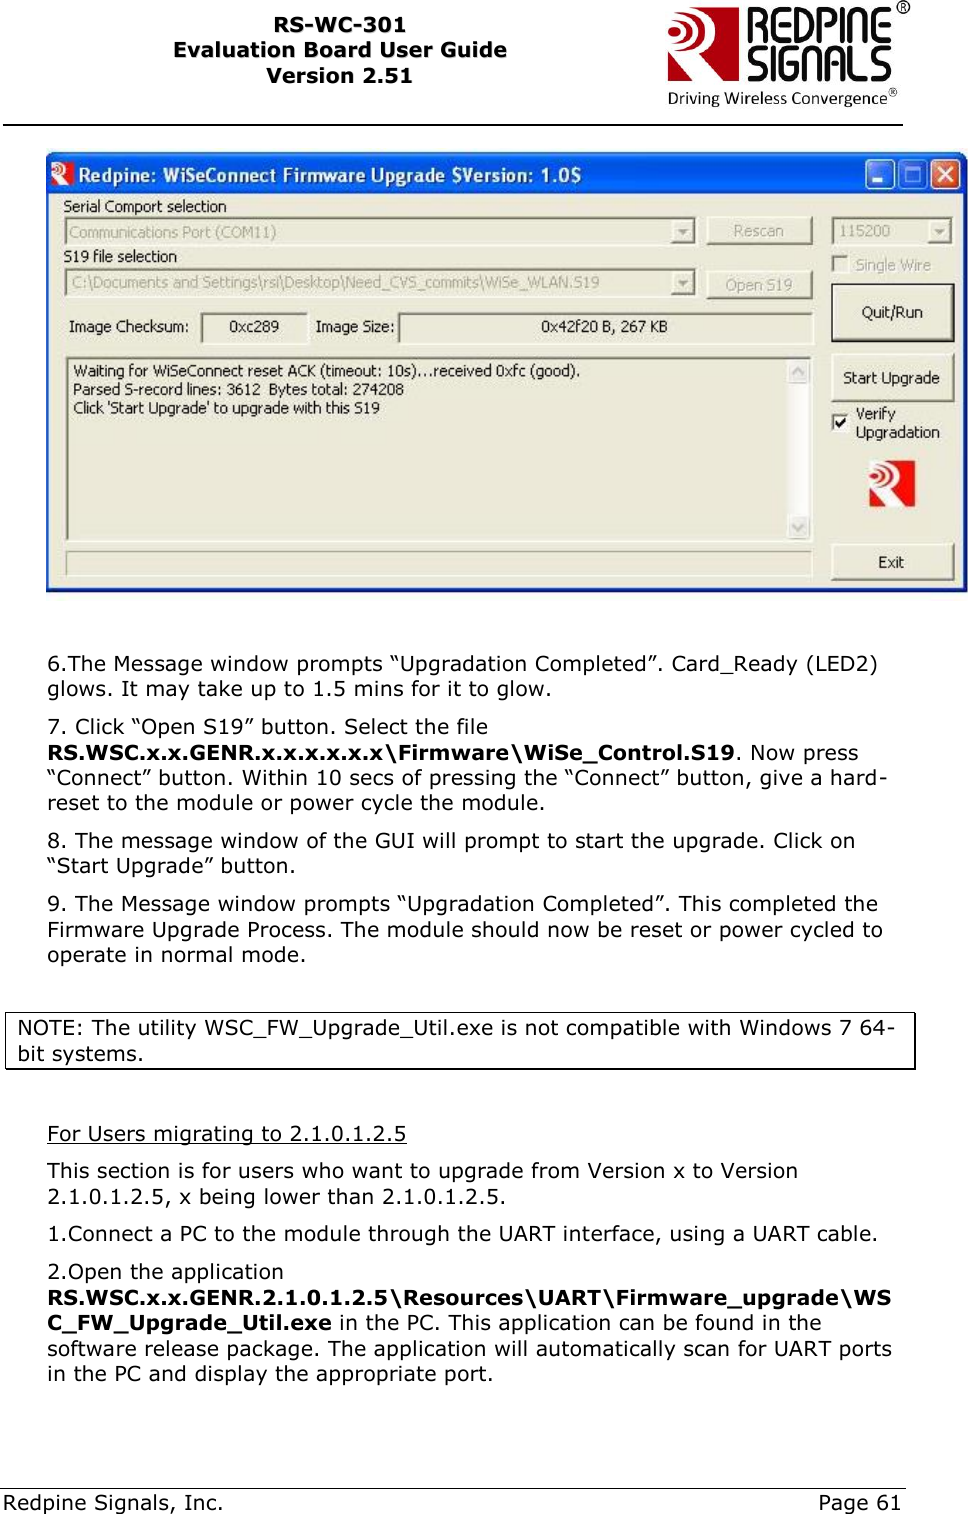     Redpine Signals, Inc.     Page 61 RRSS--WWCC--330011    EEvvaalluuaattiioonn  BBooaarrdd  UUsseerr  GGuuiiddee  VVeerrssiioonn  22..5511      6.The Message window prompts “Upgradation Completed”. Card_Ready (LED2) glows. It may take up to 1.5 mins for it to glow. 7. Click “Open S19” button. Select the file RS.WSC.x.x.GENR.x.x.x.x.x.x\Firmware\WiSe_Control.S19. Now press “Connect” button. Within 10 secs of pressing the “Connect” button, give a hard-reset to the module or power cycle the module. 8. The message window of the GUI will prompt to start the upgrade. Click on “Start Upgrade” button. 9. The Message window prompts “Upgradation Completed”. This completed the Firmware Upgrade Process. The module should now be reset or power cycled to operate in normal mode.  NOTE: The utility WSC_FW_Upgrade_Util.exe is not compatible with Windows 7 64-bit systems.   For Users migrating to 2.1.0.1.2.5 This section is for users who want to upgrade from Version x to Version 2.1.0.1.2.5, x being lower than 2.1.0.1.2.5. 1.Connect a PC to the module through the UART interface, using a UART cable. 2.Open the application RS.WSC.x.x.GENR.2.1.0.1.2.5\Resources\UART\Firmware_upgrade\WSC_FW_Upgrade_Util.exe in the PC. This application can be found in the software release package. The application will automatically scan for UART ports in the PC and display the appropriate port.   